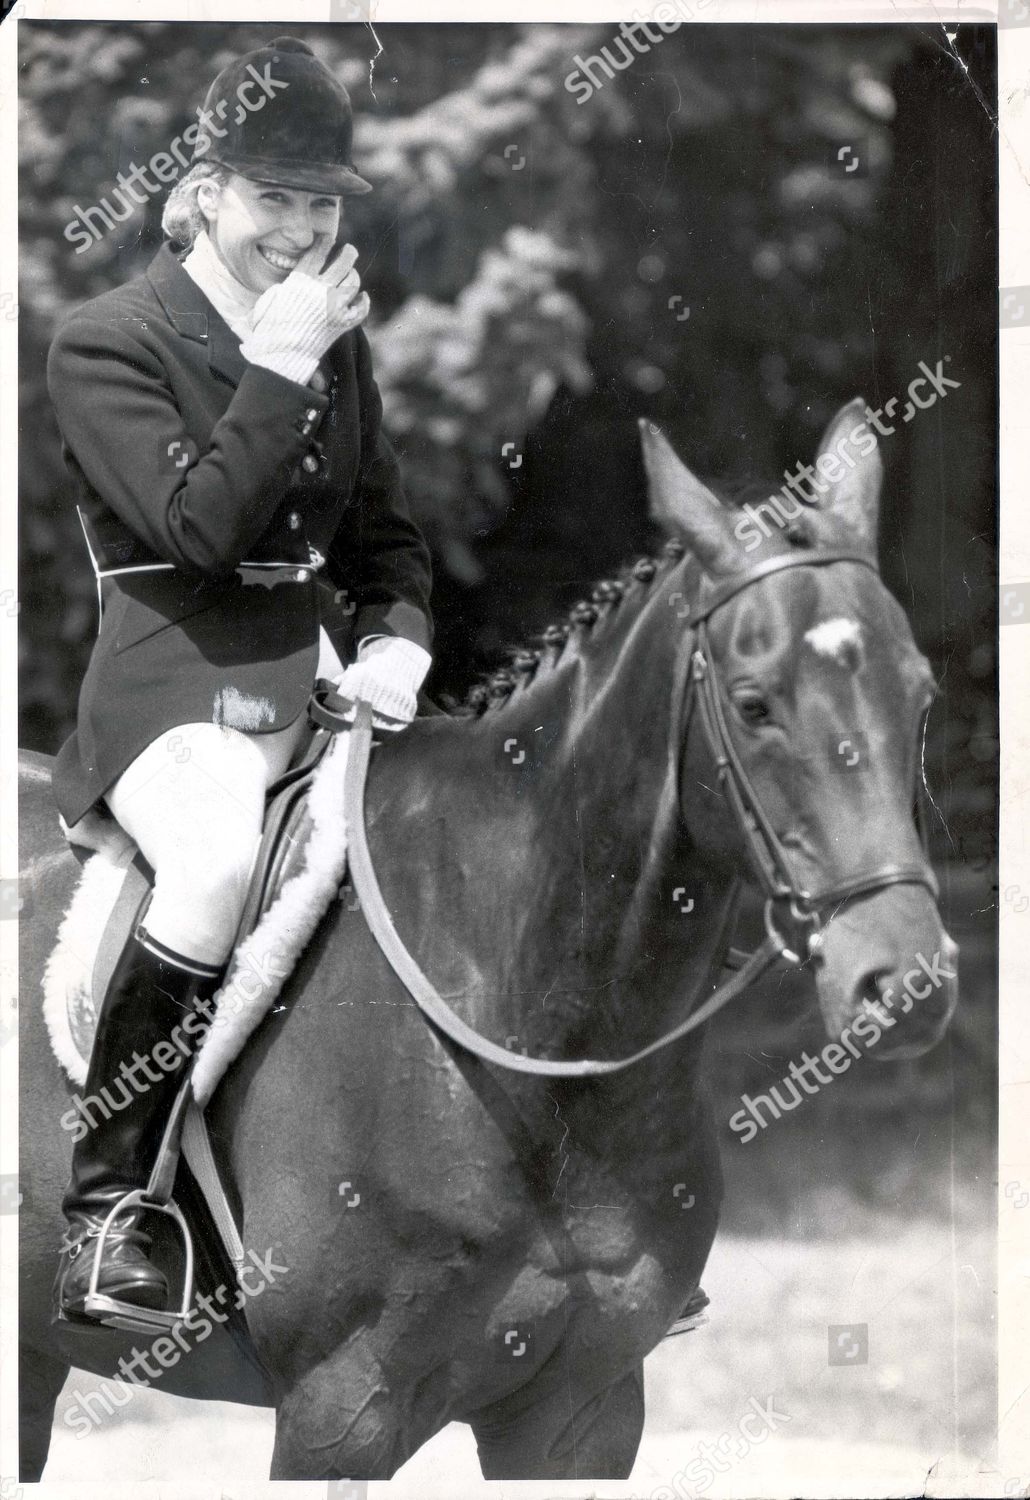 princess-anne-now-princess-royal-riding-september-1972-sportswoman-of-the-year-princess-anne-had-a-big-disappointment-yesterday-when-an-injury-to-her-star-horse-doublet-put-her-out-of-the-running-for-olympic-selection-her-enthusiasm-and-enjoymen-shutterstock-editorial-892198a.jpg